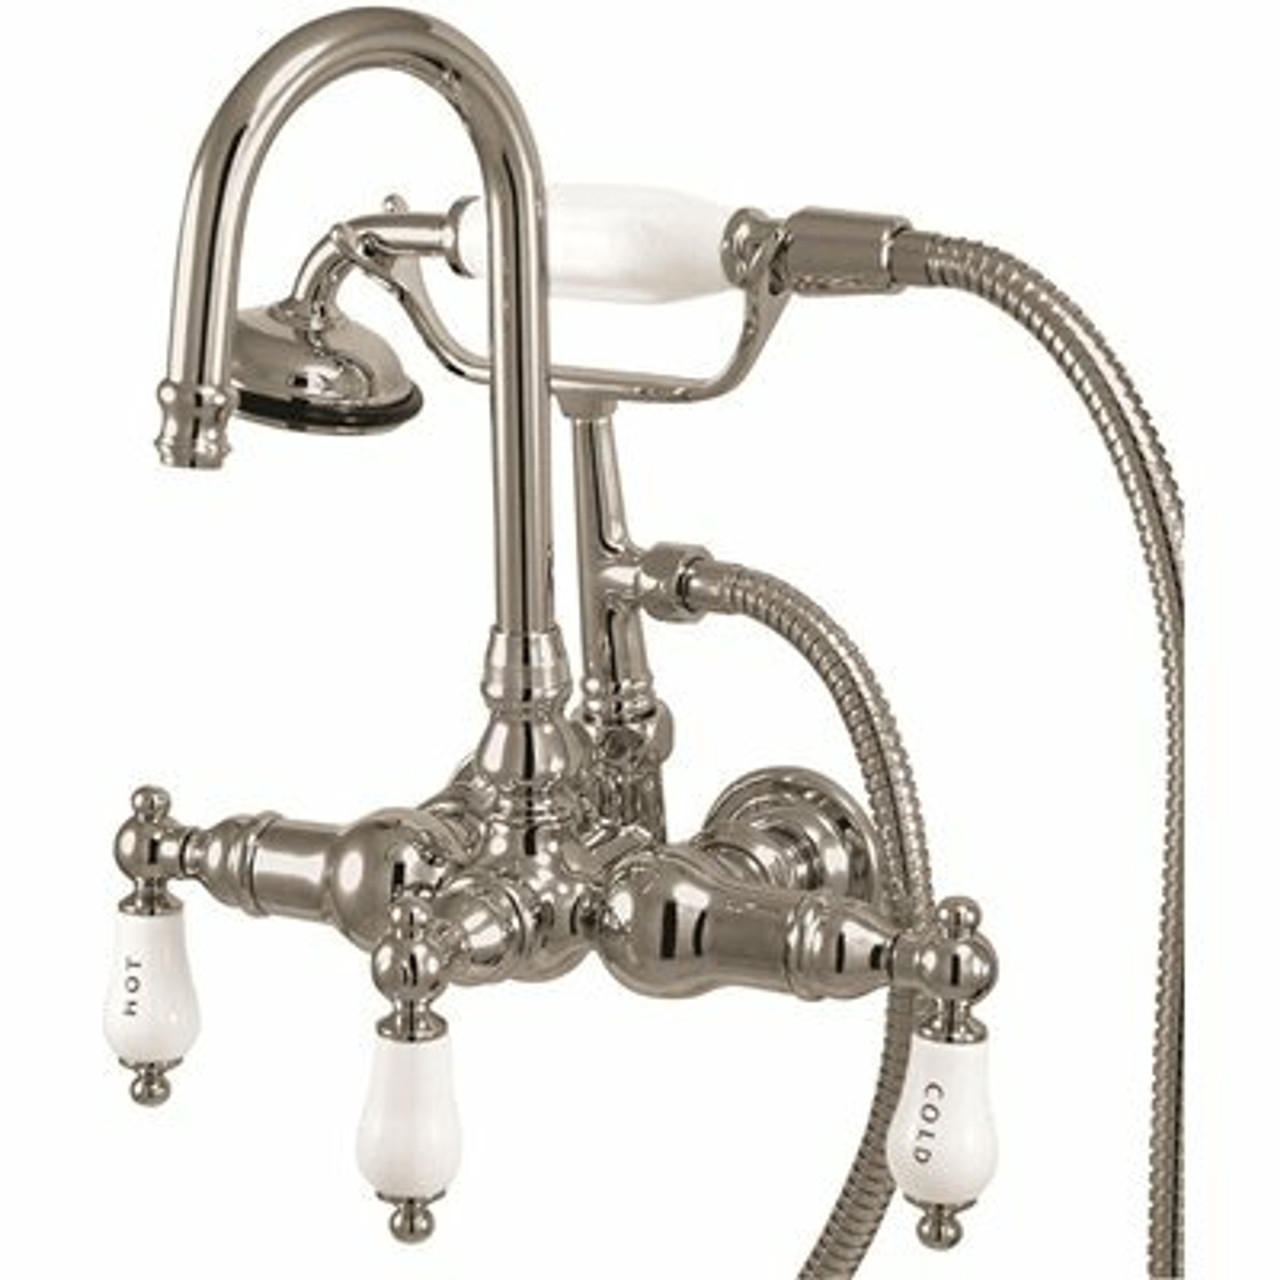 Kingston Brass 3-Handle Claw Foot Tub Faucet With Handshower In Chrome